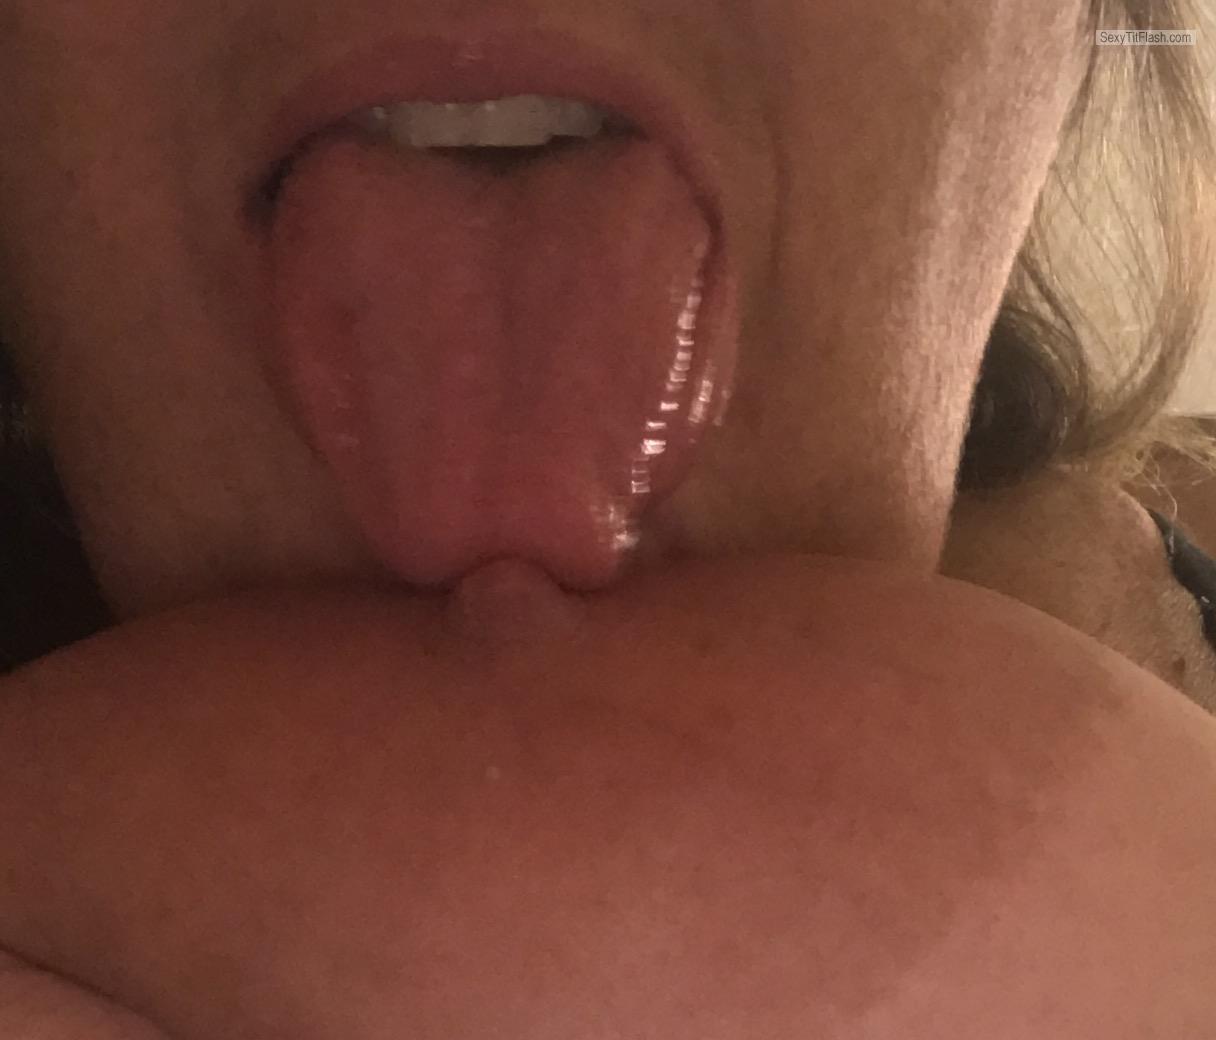 Tit Flash: My Extremely Big Tits (Selfie) - Hugetits4u from United States